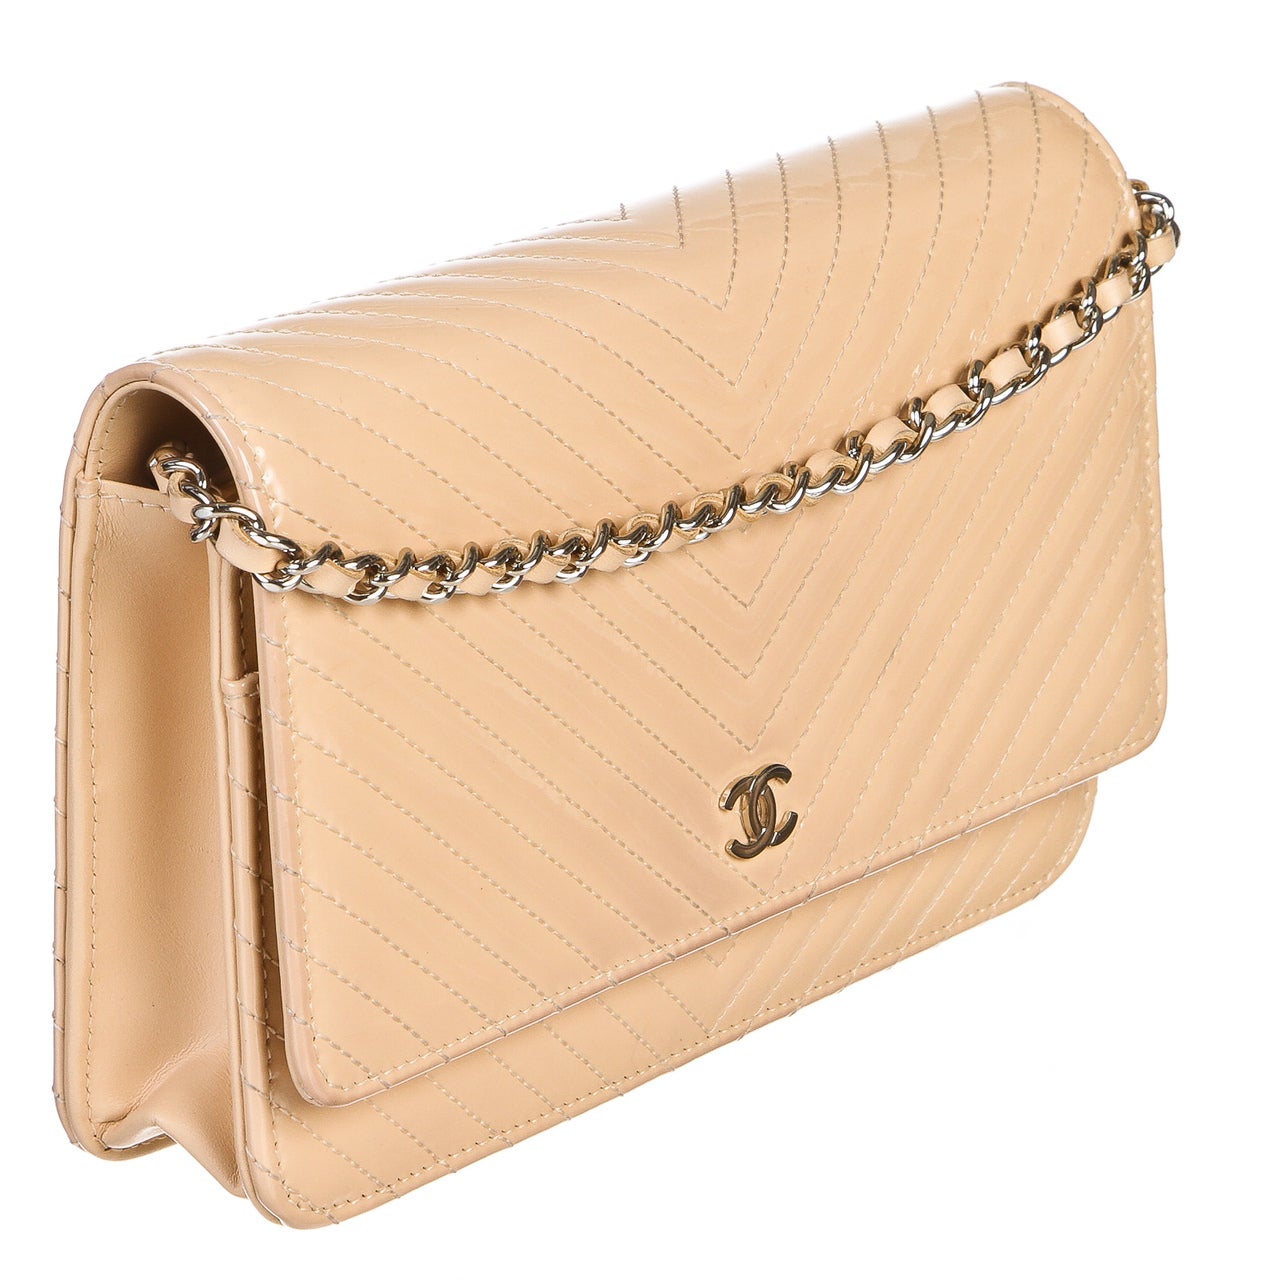 Women's Chanel Biege Patent Leather Chevron Quilted WOC Wallet on a Chain Handbag For Sale